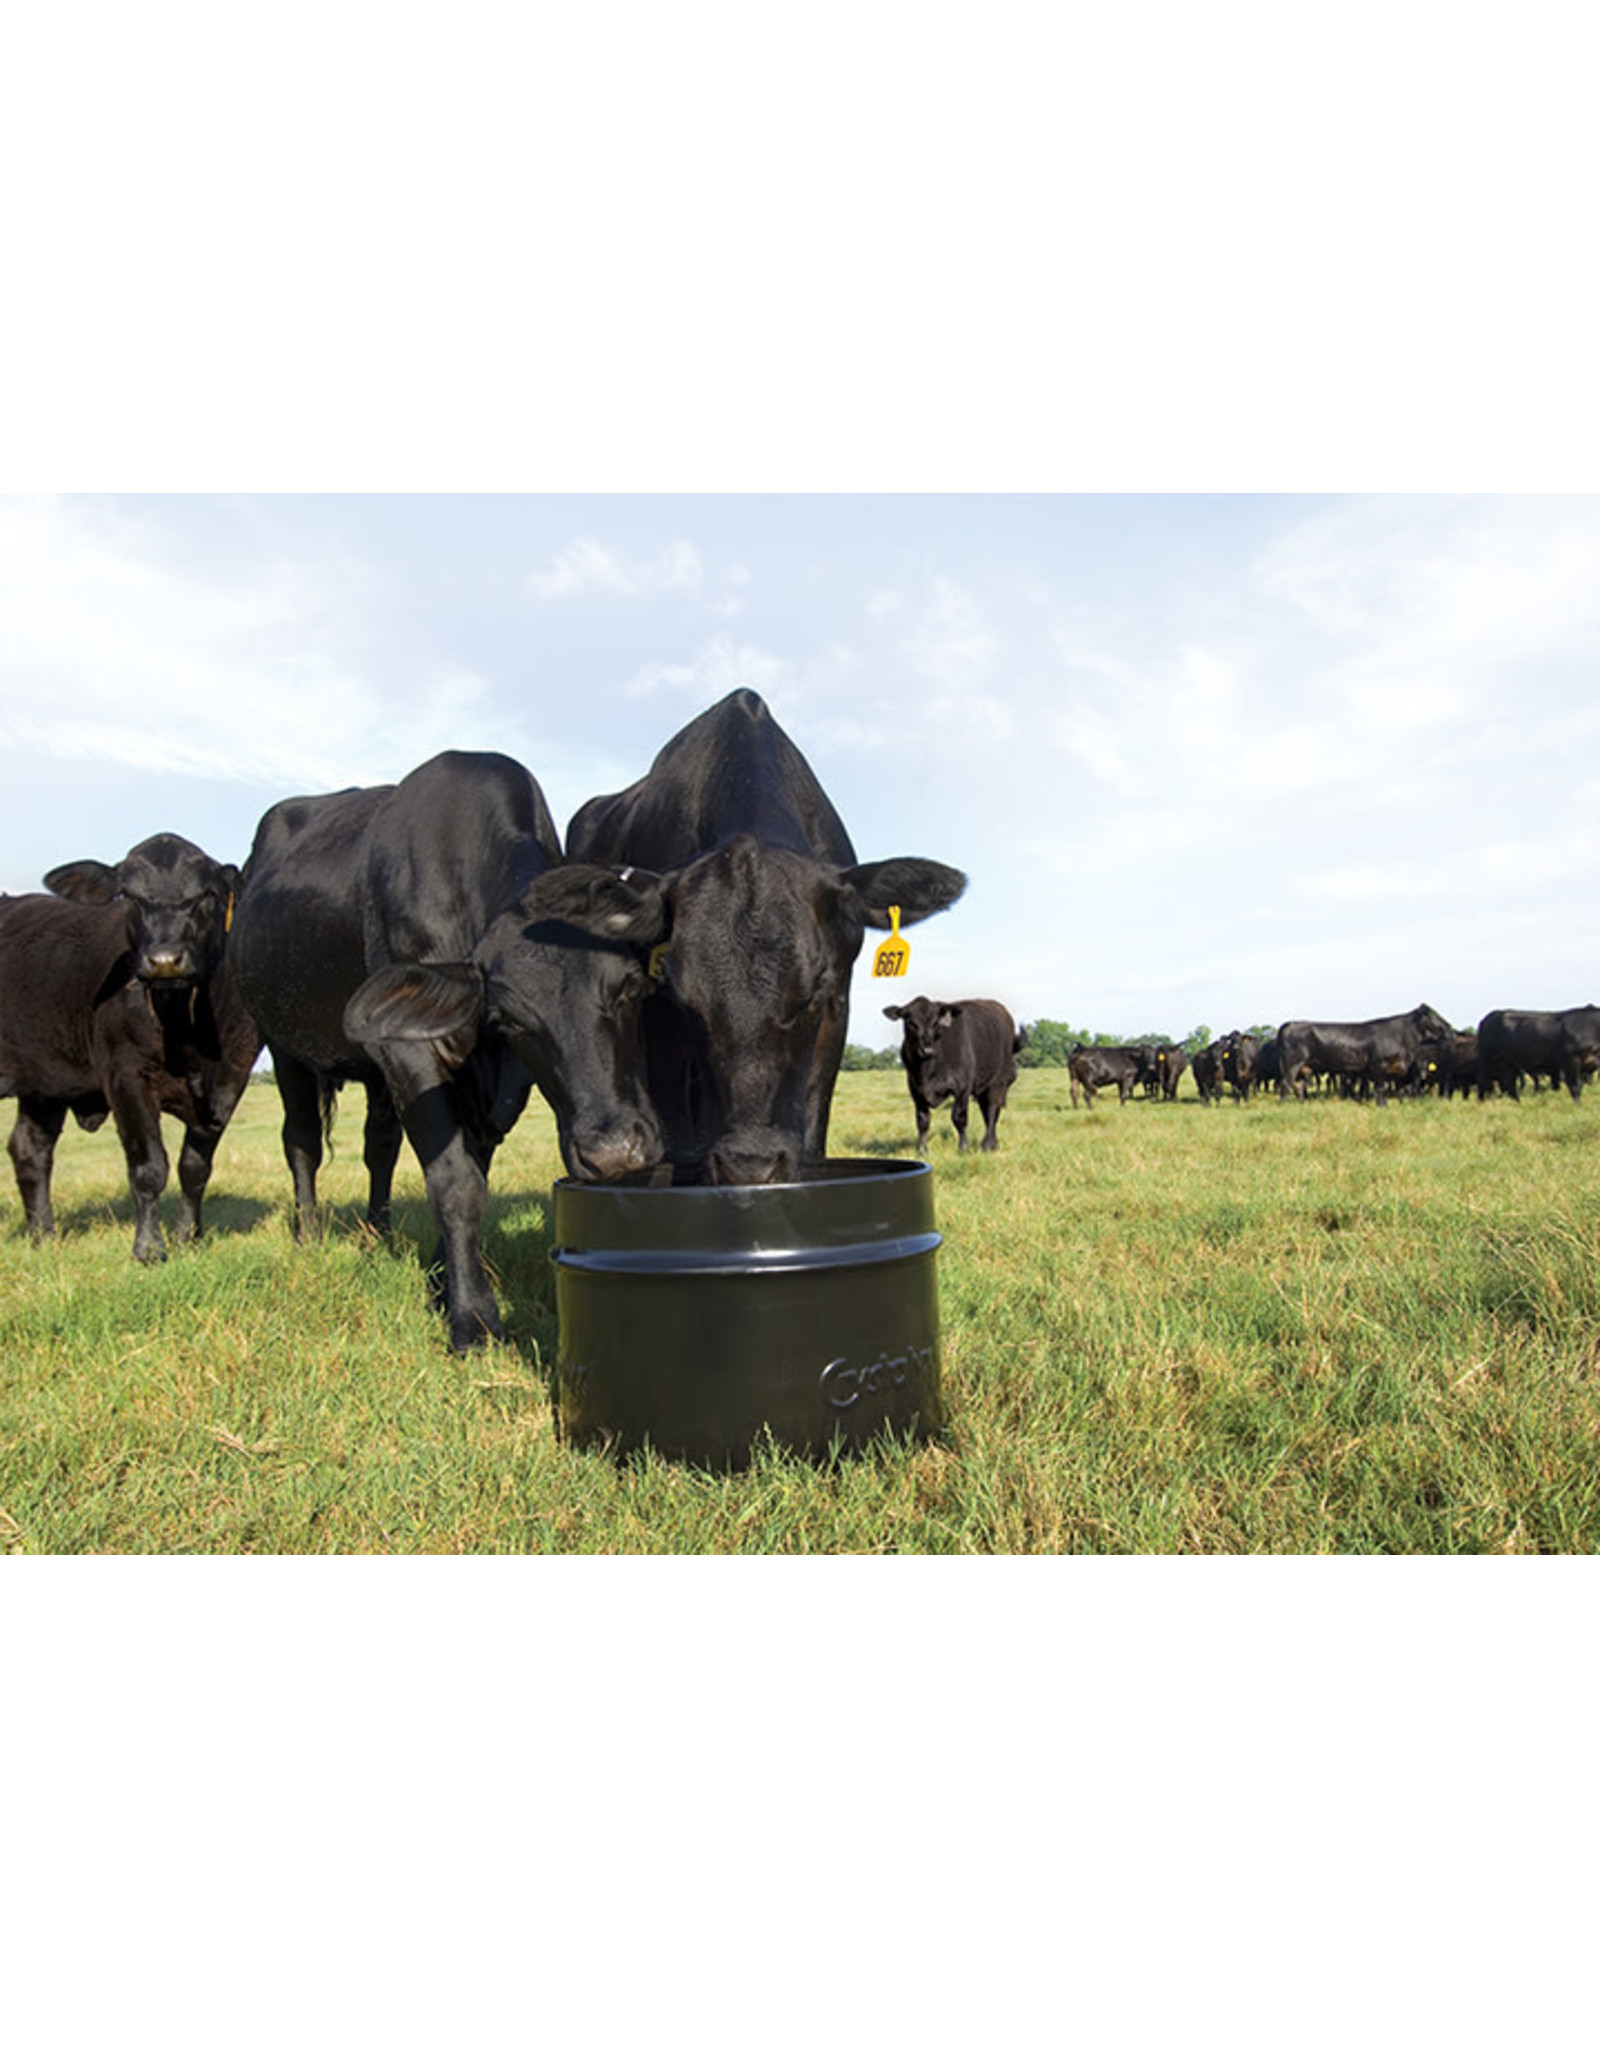 Crystalyx VP 30% - Steel 250lbs  late season pastures, crop residuce, and moderate to low quality harvested forages. Protein 30.0% Fat 4.0% Fiber 3.0% Calcium 2.0% Phosphorus 2.0% Magn. 1.0% Potassium  2.0%